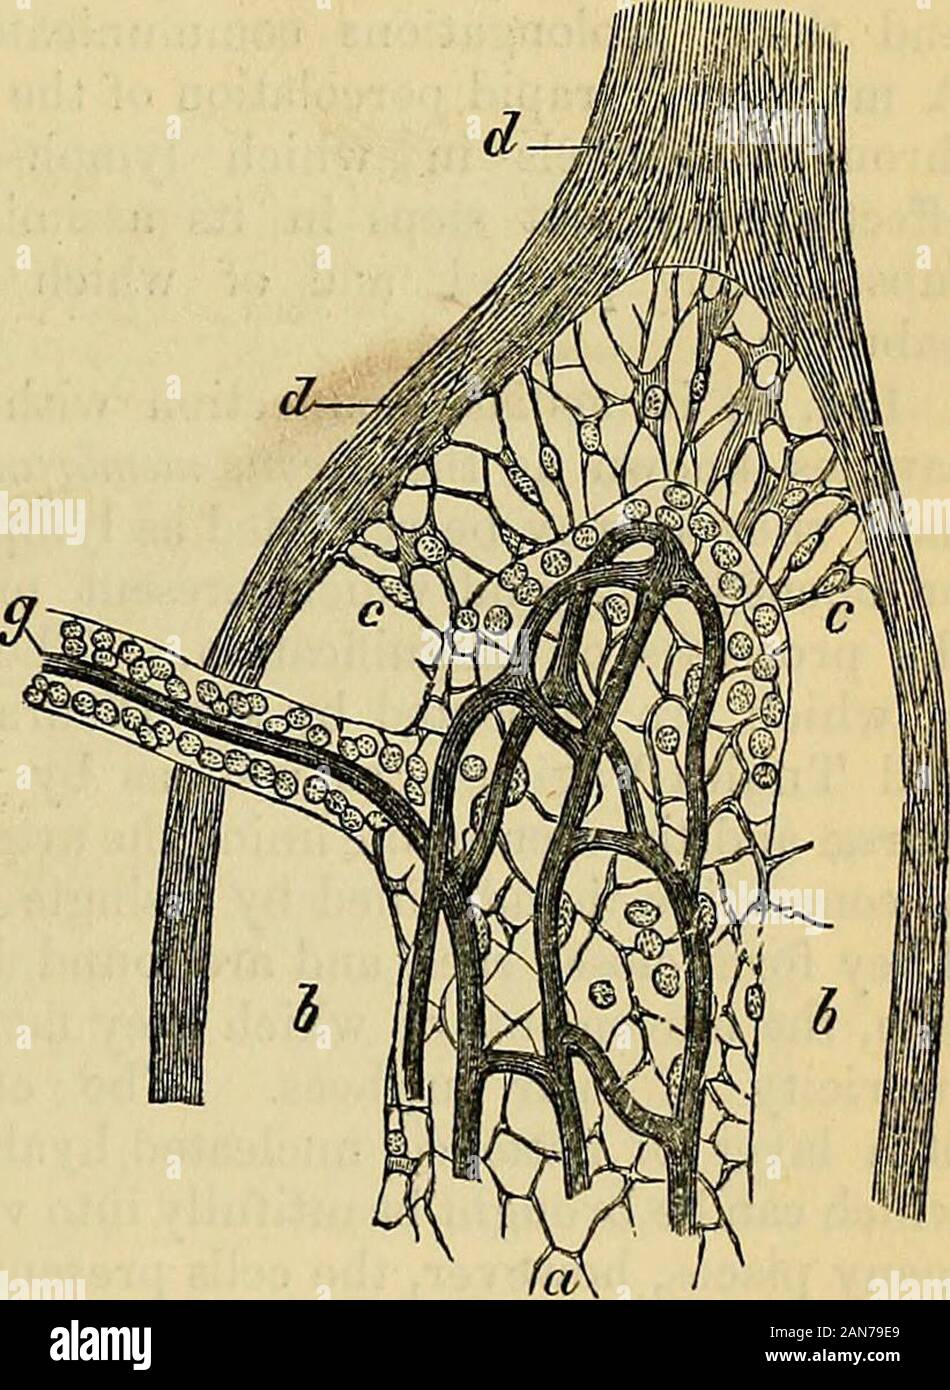 Carpenter's principles of human physiology . e alveoli, and theprocesses of medullary substancepartially filling them. These aretermed the investing spaces (Frey)or lymphatic sinuses (His) of thefollicle, and are represented by bin Figs. 86 and 87. They aretraversed by irregular fibres, formedof nucleated cells with anastomosing prolongations, C C, Fig. 87. Accord- Portion of the Medullary substance of the Mesente-ino- to v ?Rpptlino-rianspn * tVimr aw ric Gland of an ox. The artery injected with Chromate ing 10 v. .ttecKnngnausen, tney are of Lead x 300 a&gt; Medullary aubstance with capillar Stock Photo